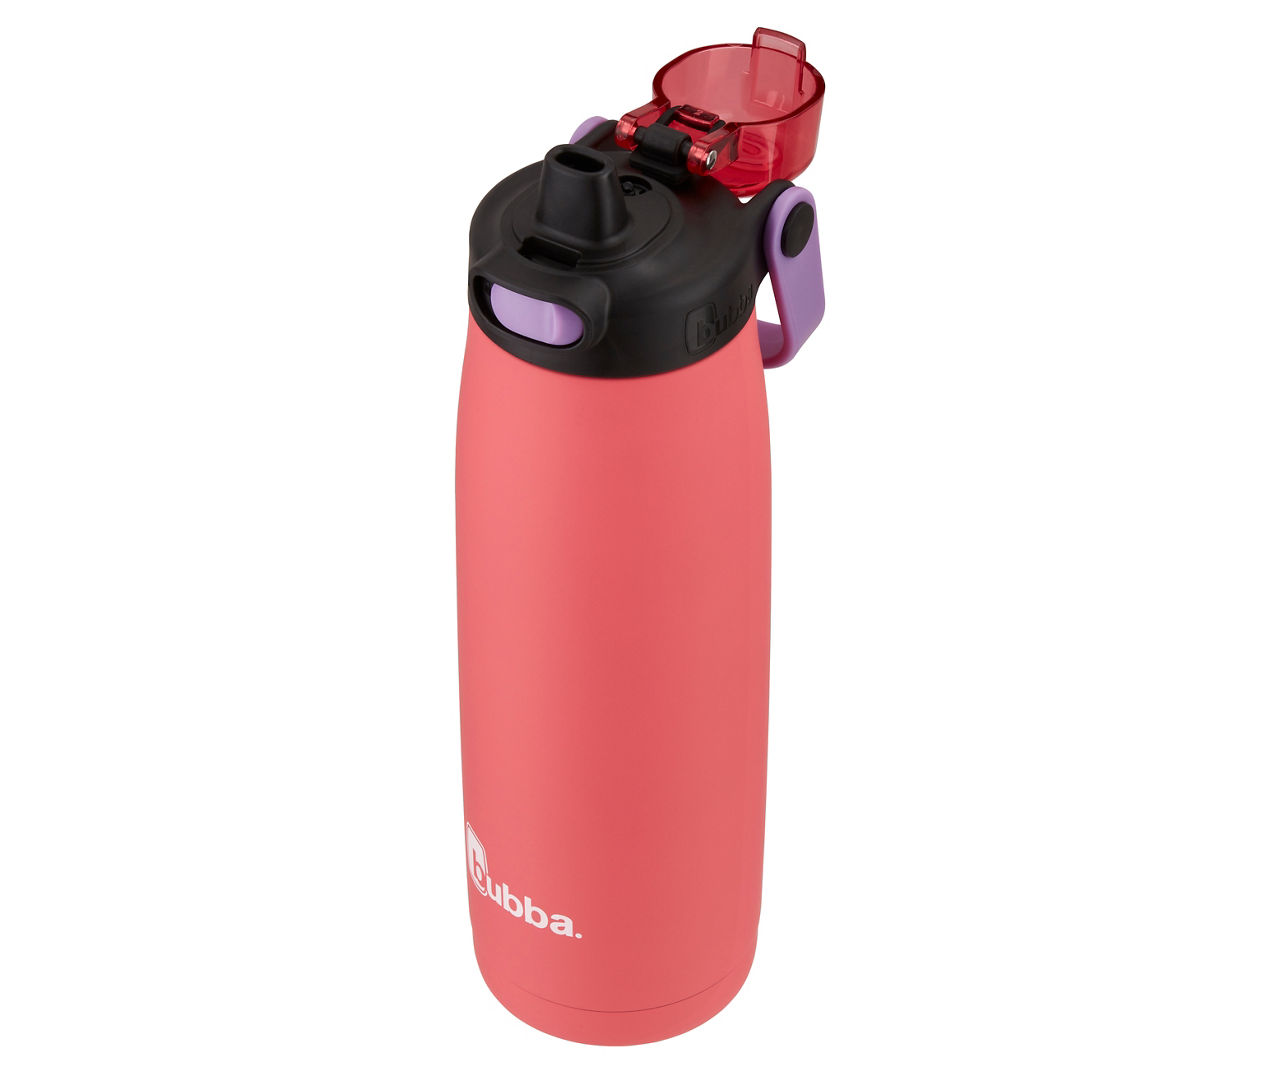 Bubba Red Radiant Chug Stainless Steel Water Bottle, 24 Oz.